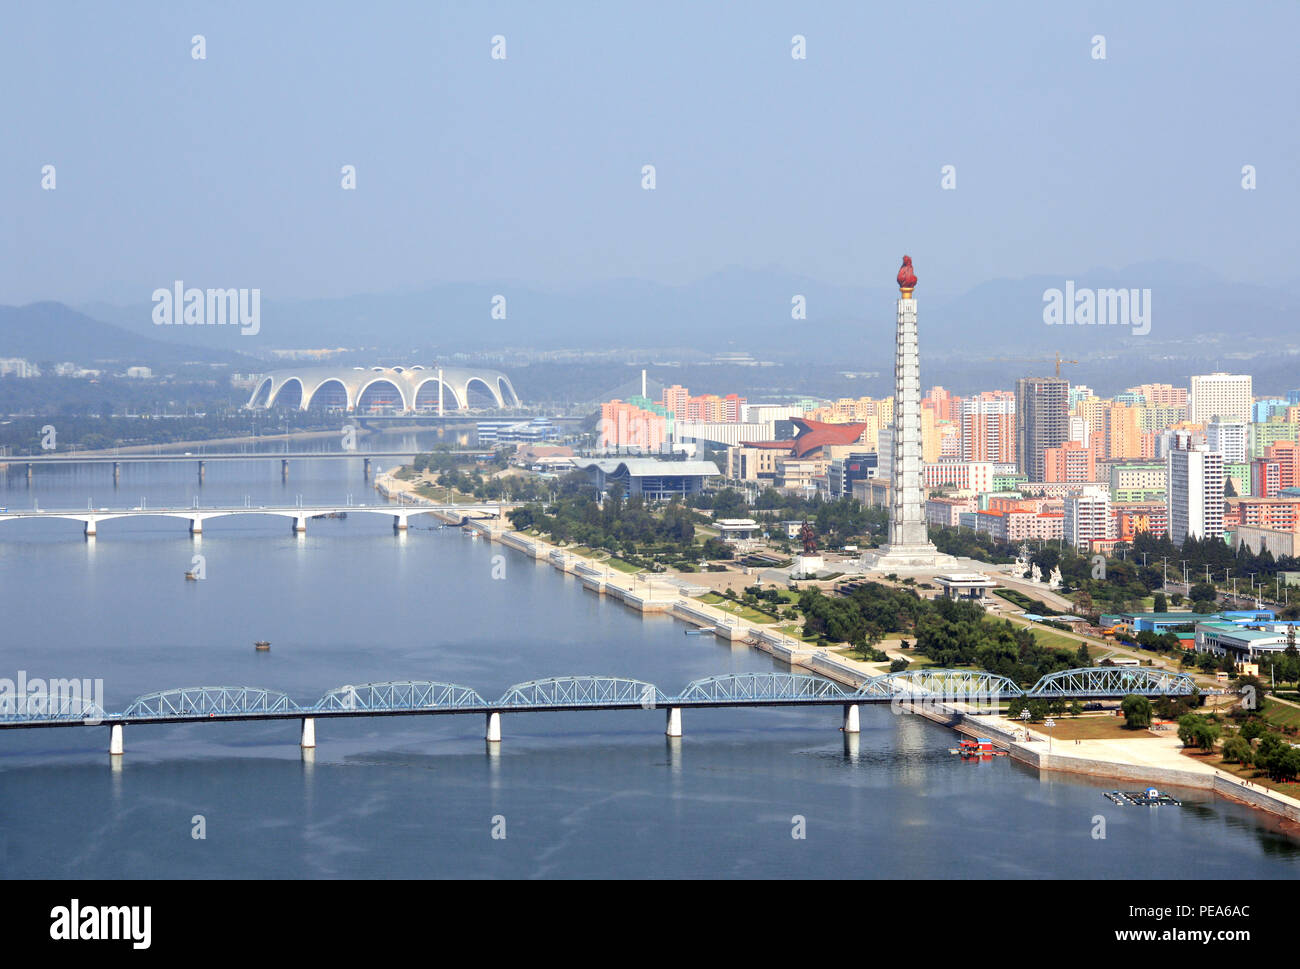 PYONGYANG, NORTH KOREA (DPRK) - SEPTEMBER 25, 2017: Aerial view of new residential complex, Tower of the Juche Idea and Daedong River (Taedong River). Stock Photo